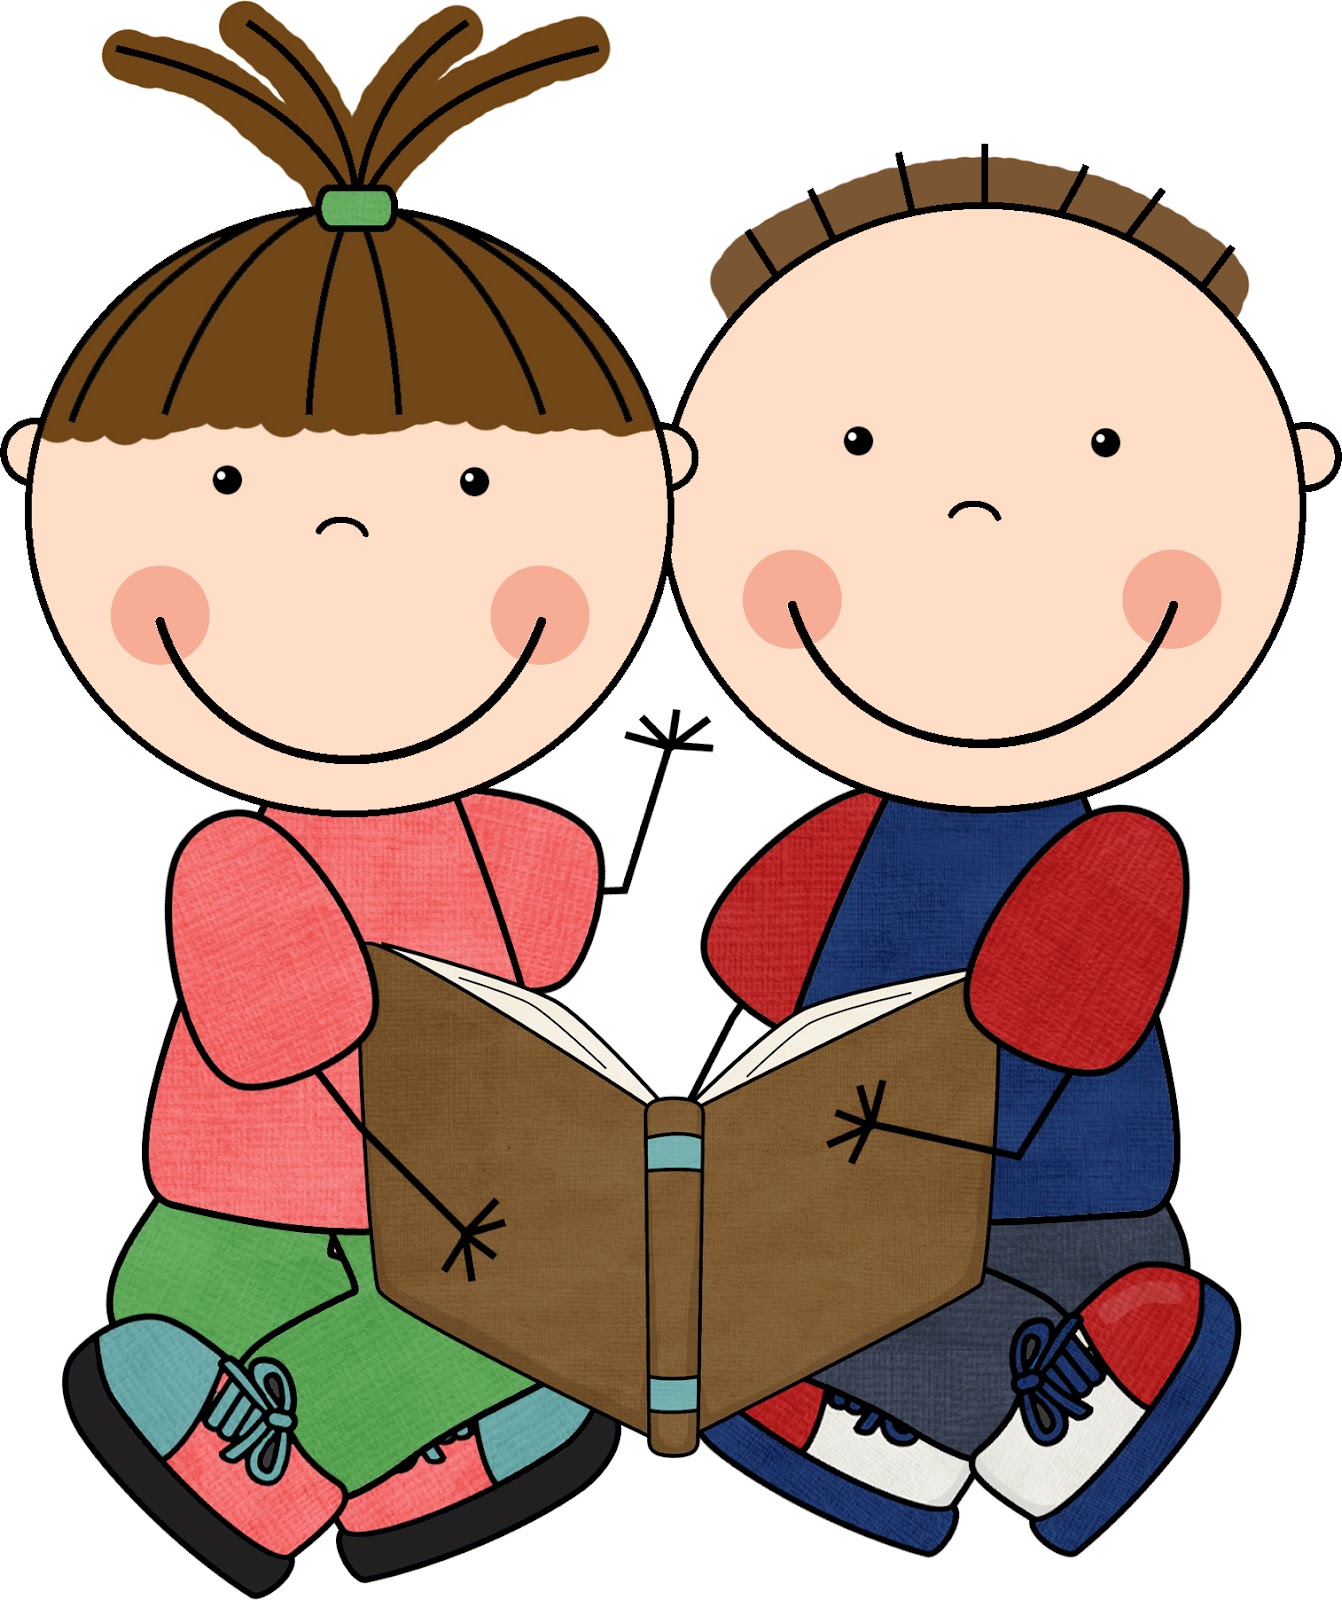 Helping Others Clipart - ClipArt Best